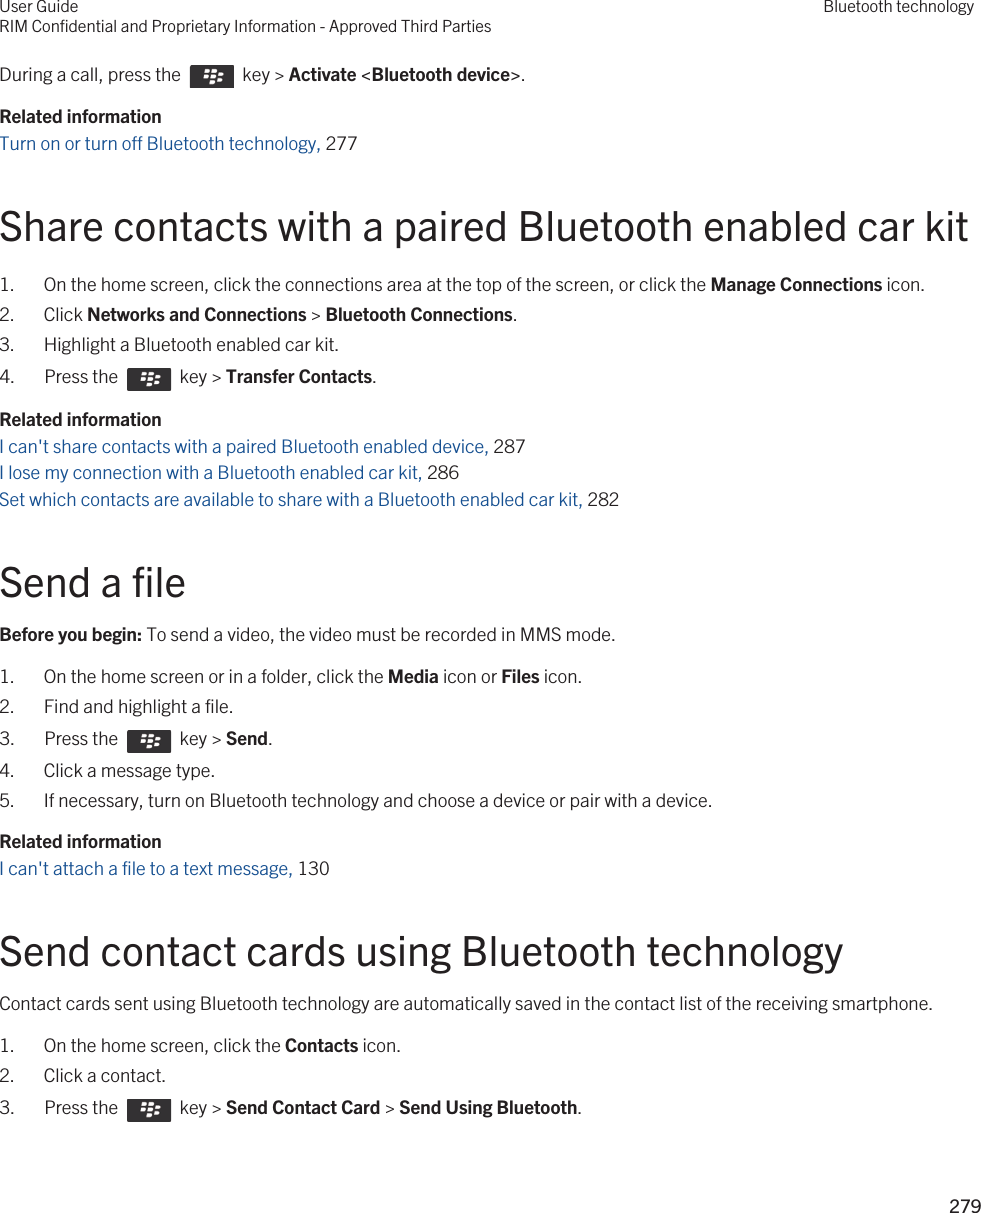 During a call, press the    key &gt; Activate &lt;Bluetooth device&gt;.Related informationTurn on or turn off Bluetooth technology, 277 Share contacts with a paired Bluetooth enabled car kit1. On the home screen, click the connections area at the top of the screen, or click the Manage Connections icon.2. Click Networks and Connections &gt; Bluetooth Connections.3. Highlight a Bluetooth enabled car kit.4.  Press the    key &gt; Transfer Contacts. Related informationI can&apos;t share contacts with a paired Bluetooth enabled device, 287I lose my connection with a Bluetooth enabled car kit, 286Set which contacts are available to share with a Bluetooth enabled car kit, 282Send a fileBefore you begin: To send a video, the video must be recorded in MMS mode.1. On the home screen or in a folder, click the Media icon or Files icon.2. Find and highlight a file.3.  Press the    key &gt; Send. 4. Click a message type.5. If necessary, turn on Bluetooth technology and choose a device or pair with a device.Related informationI can&apos;t attach a file to a text message, 130 Send contact cards using Bluetooth technologyContact cards sent using Bluetooth technology are automatically saved in the contact list of the receiving smartphone.1. On the home screen, click the Contacts icon.2. Click a contact.3.  Press the    key &gt; Send Contact Card &gt; Send Using Bluetooth. User GuideRIM Confidential and Proprietary Information - Approved Third PartiesBluetooth technology279 